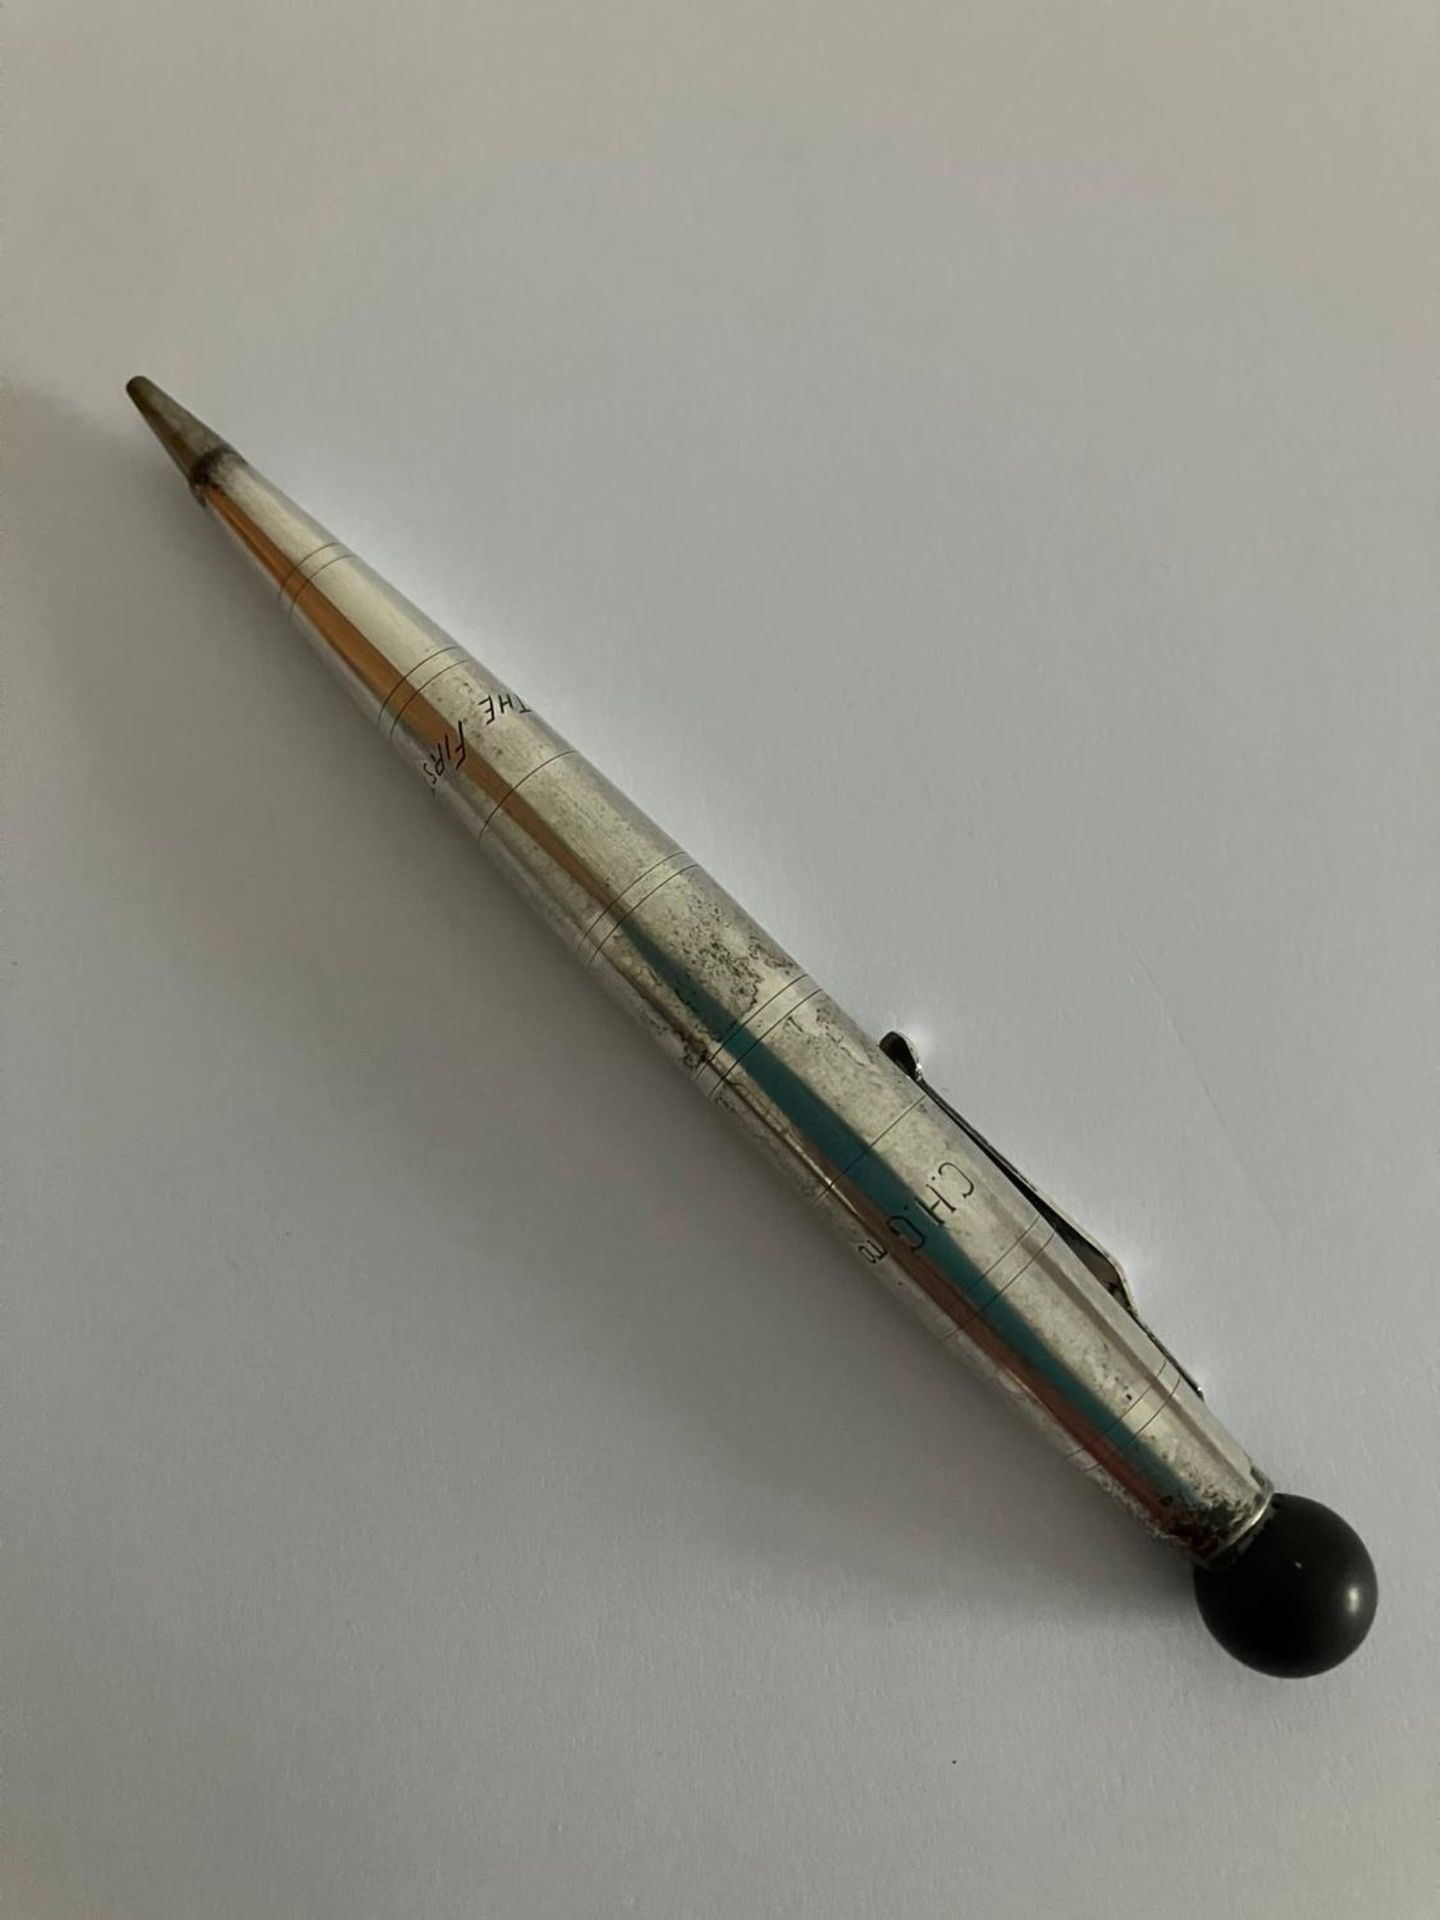 Vintage SILVER PROPELLING PENCIL with full hallmark for G.Stockwell London 1932. Working order. - Image 2 of 2